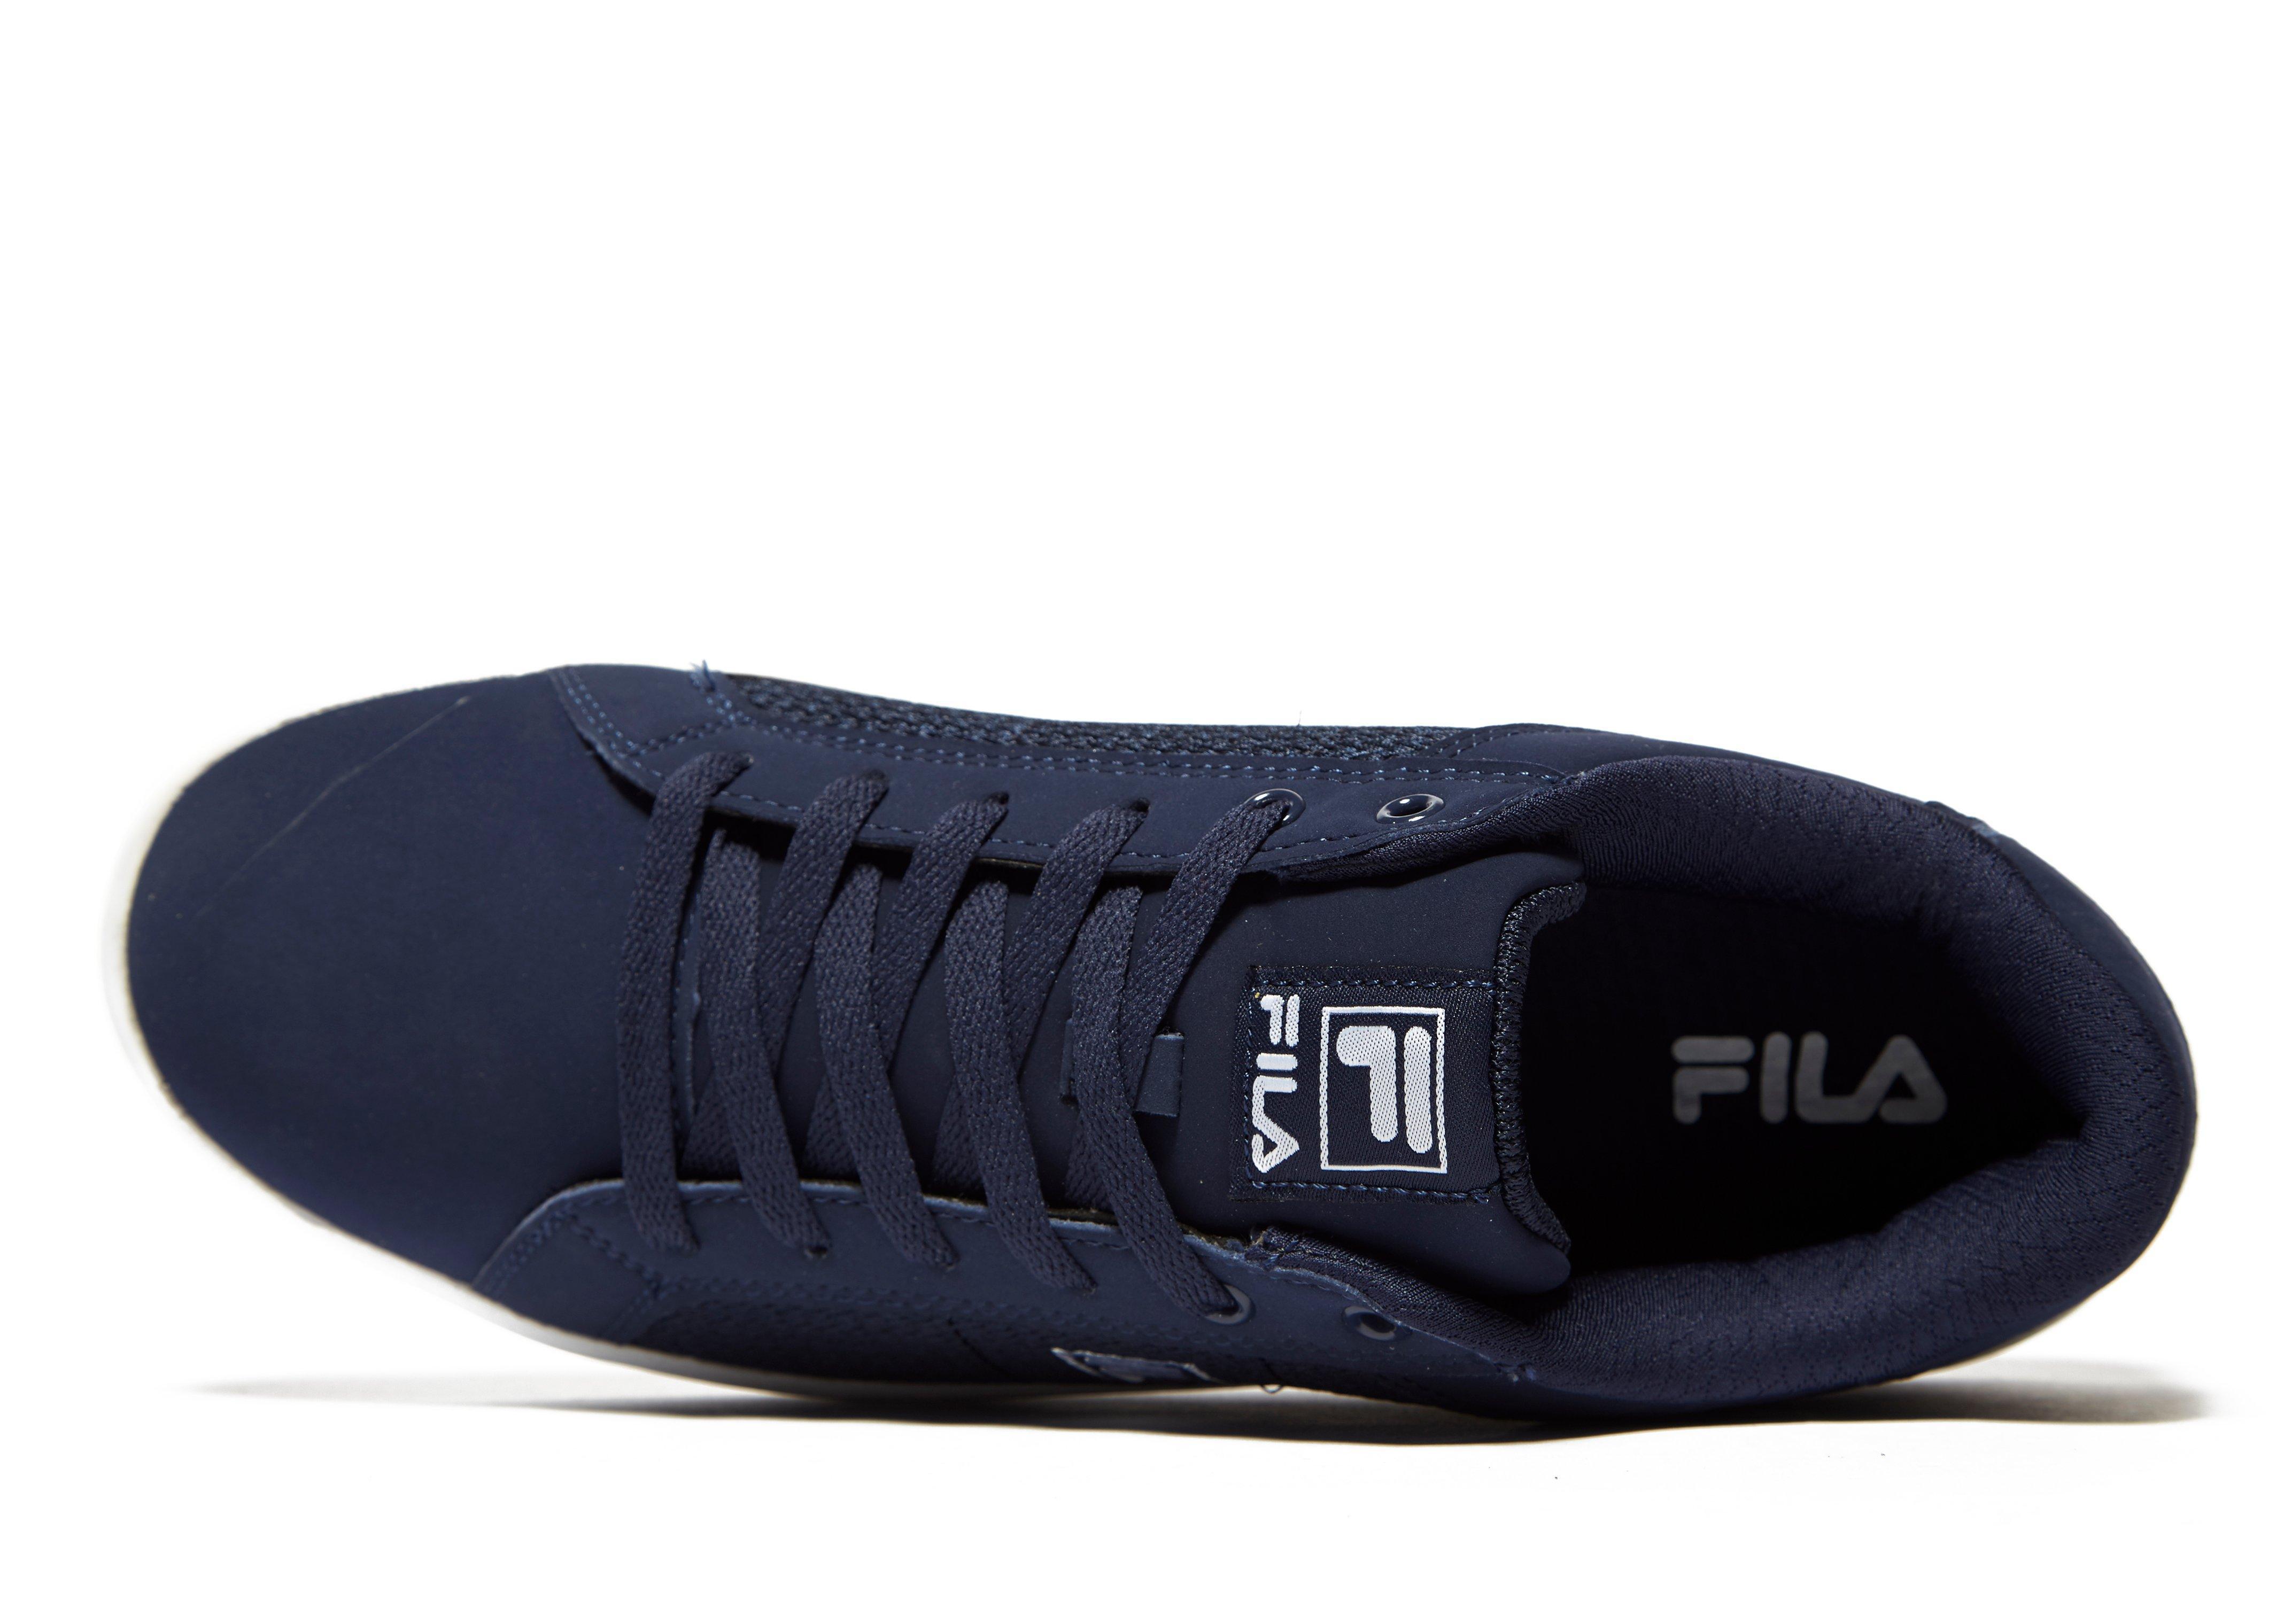 Fila Leather Campora in Navy Blue (Blue) for Men - Lyst